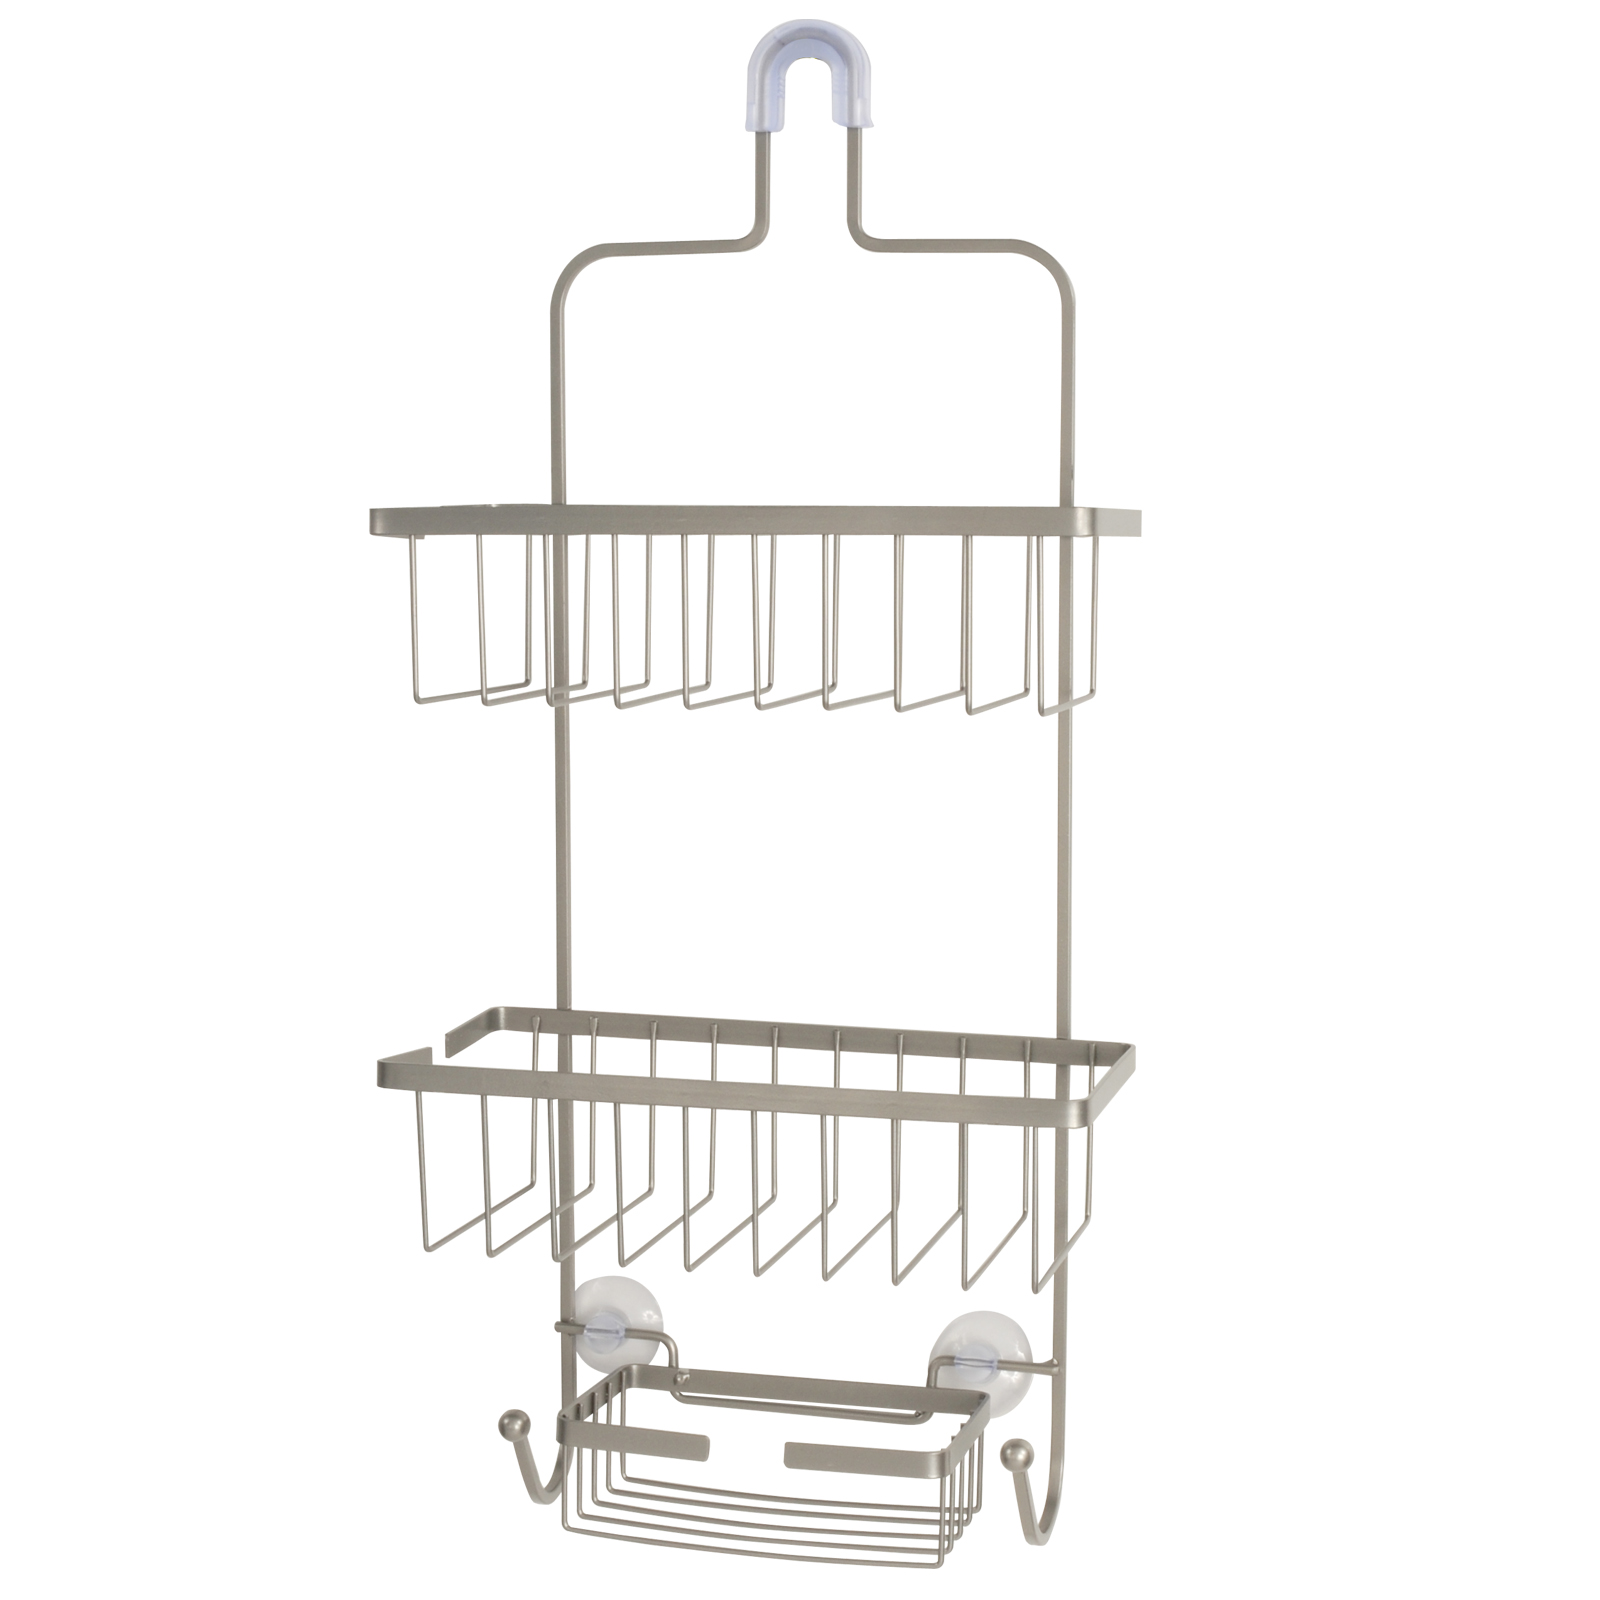 0019442516024 - DELUXE LARGE SHOWER CADDY WITH THREE BASKETS 2 HOOKS AND 2 SUCTION CUPS BRUSHED NICKEL FINISH